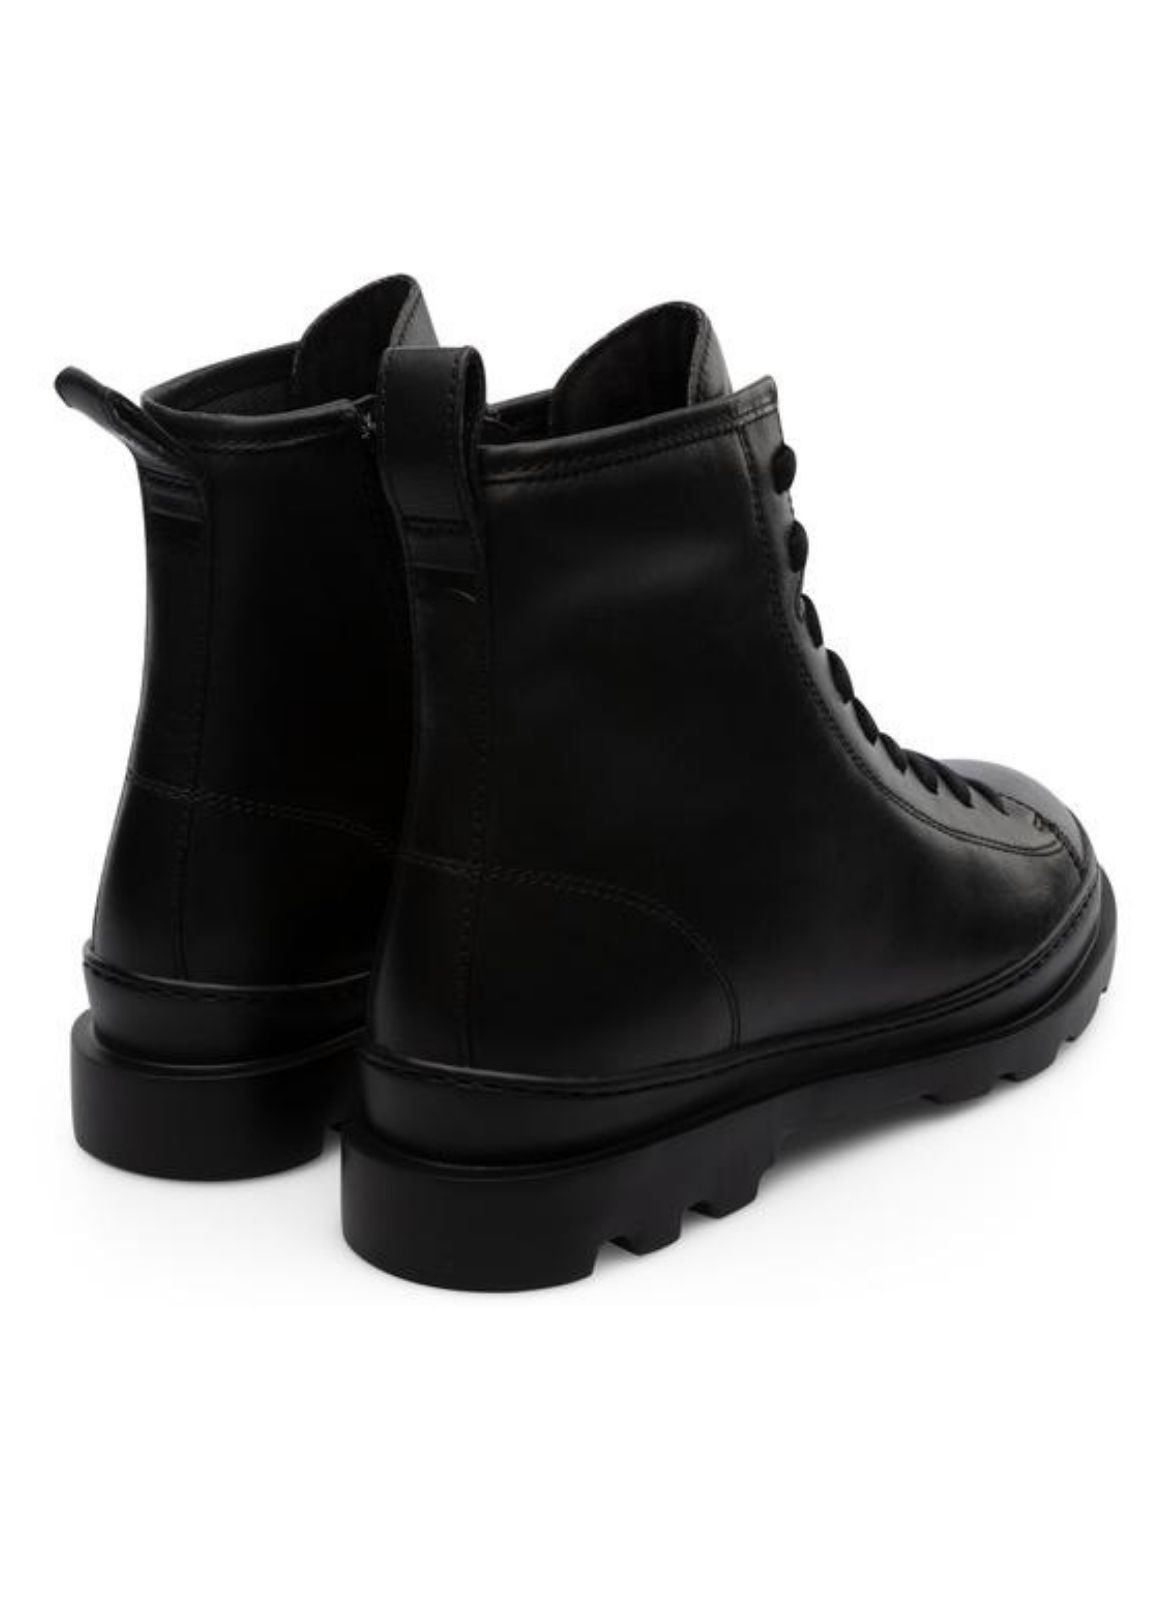 Camper - Women's Brutus Ankle Boots